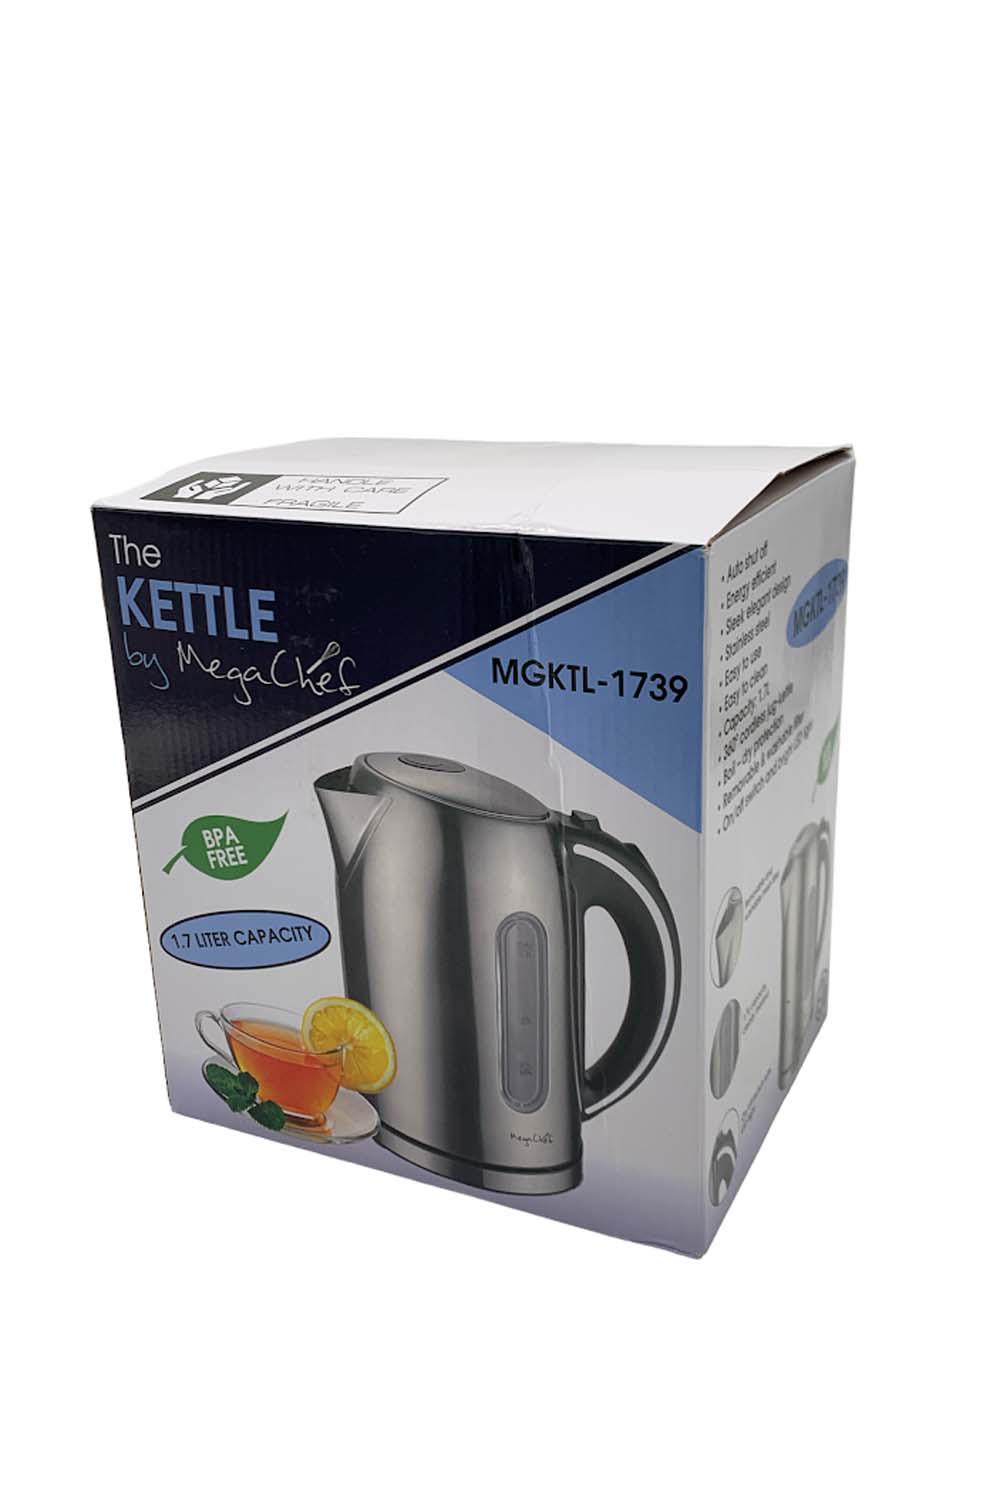 MegaChef 1.7 Liter Glass and Stainless Steel Electric Tea Kettle